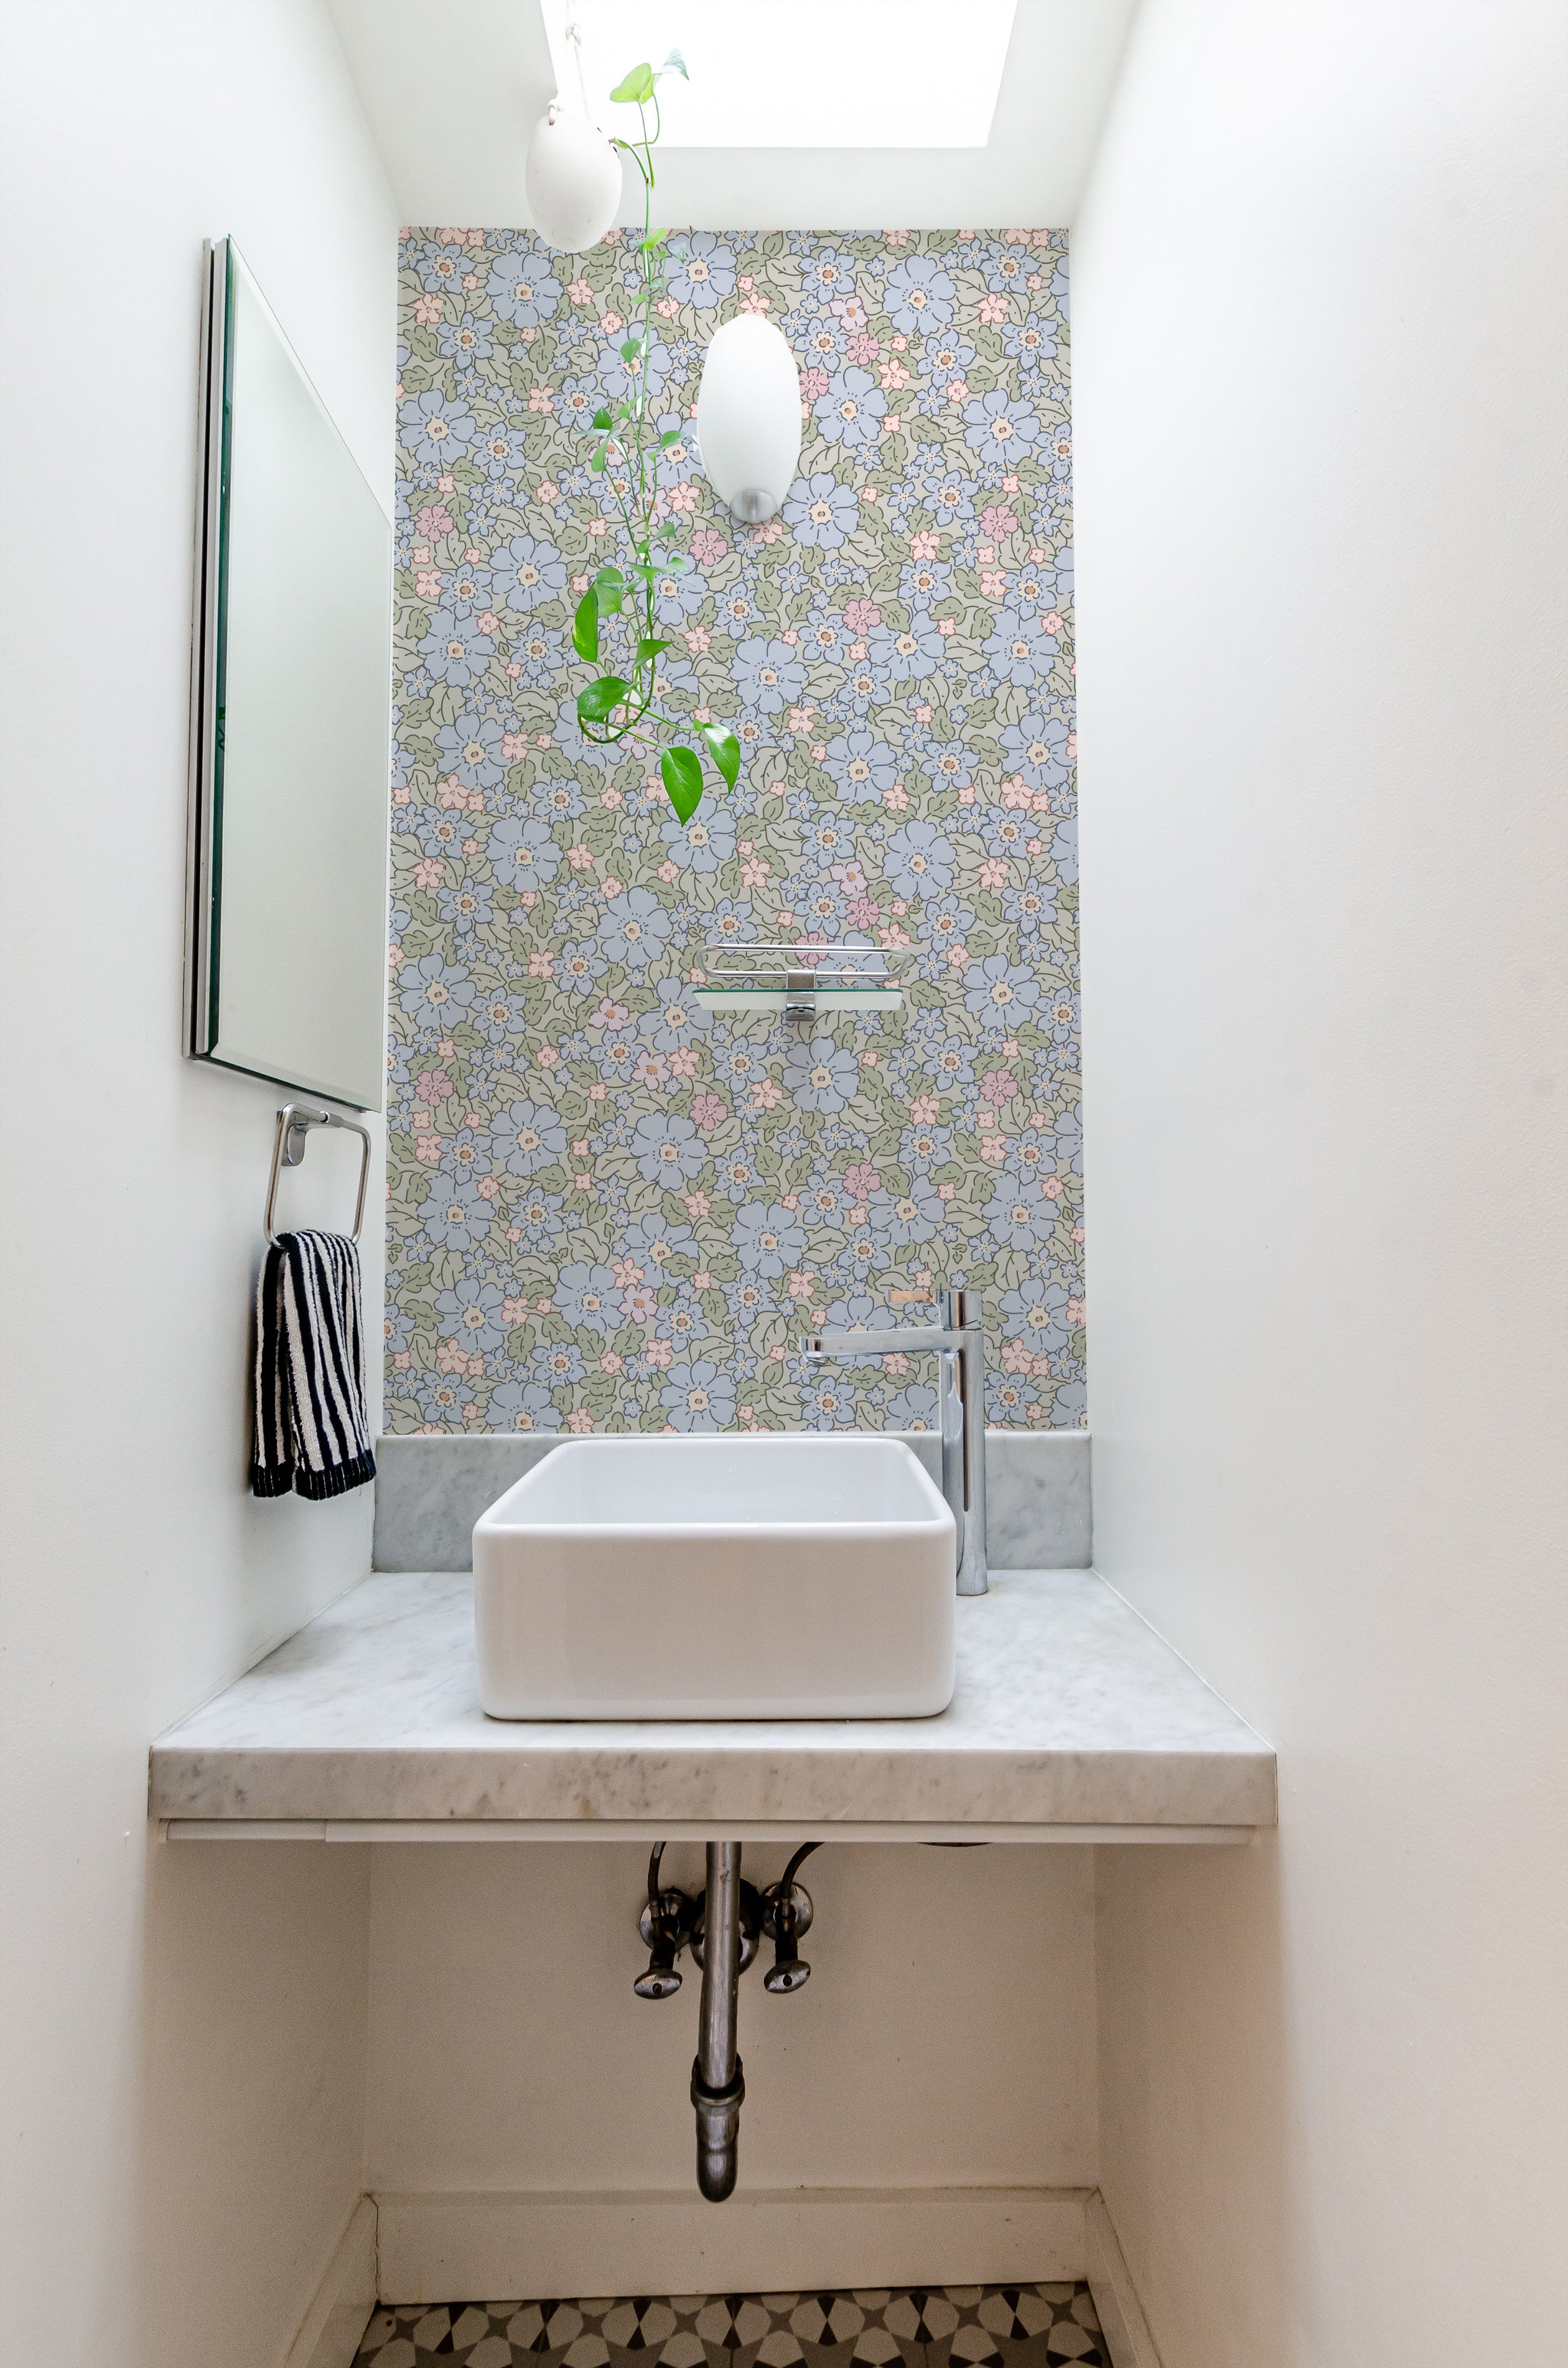 A small and elegant bathroom space enhanced with Joie Wallpaper, which features a beautiful floral pattern in shades of blue, pink, and green on a light green background. The room is fitted with a modern white sink on a marble countertop, under a skylight that adds natural light to the floral ambiance.